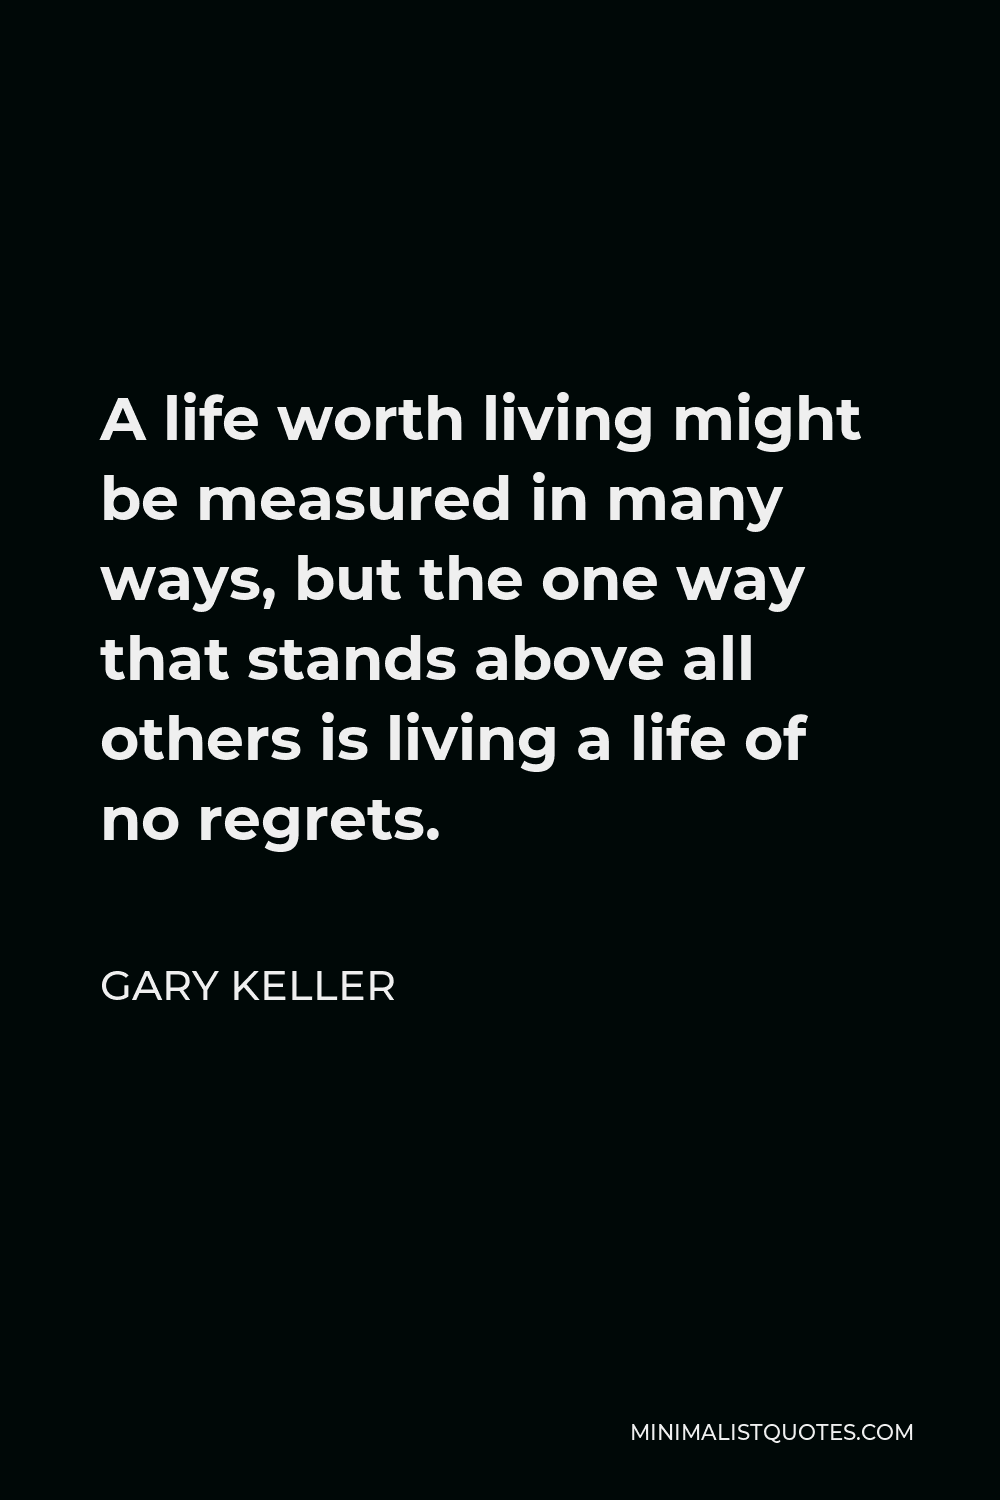 Gary Keller Quote - A life worth living might be measured in many ways, but the one way that stands above all others is living a life of no regrets.